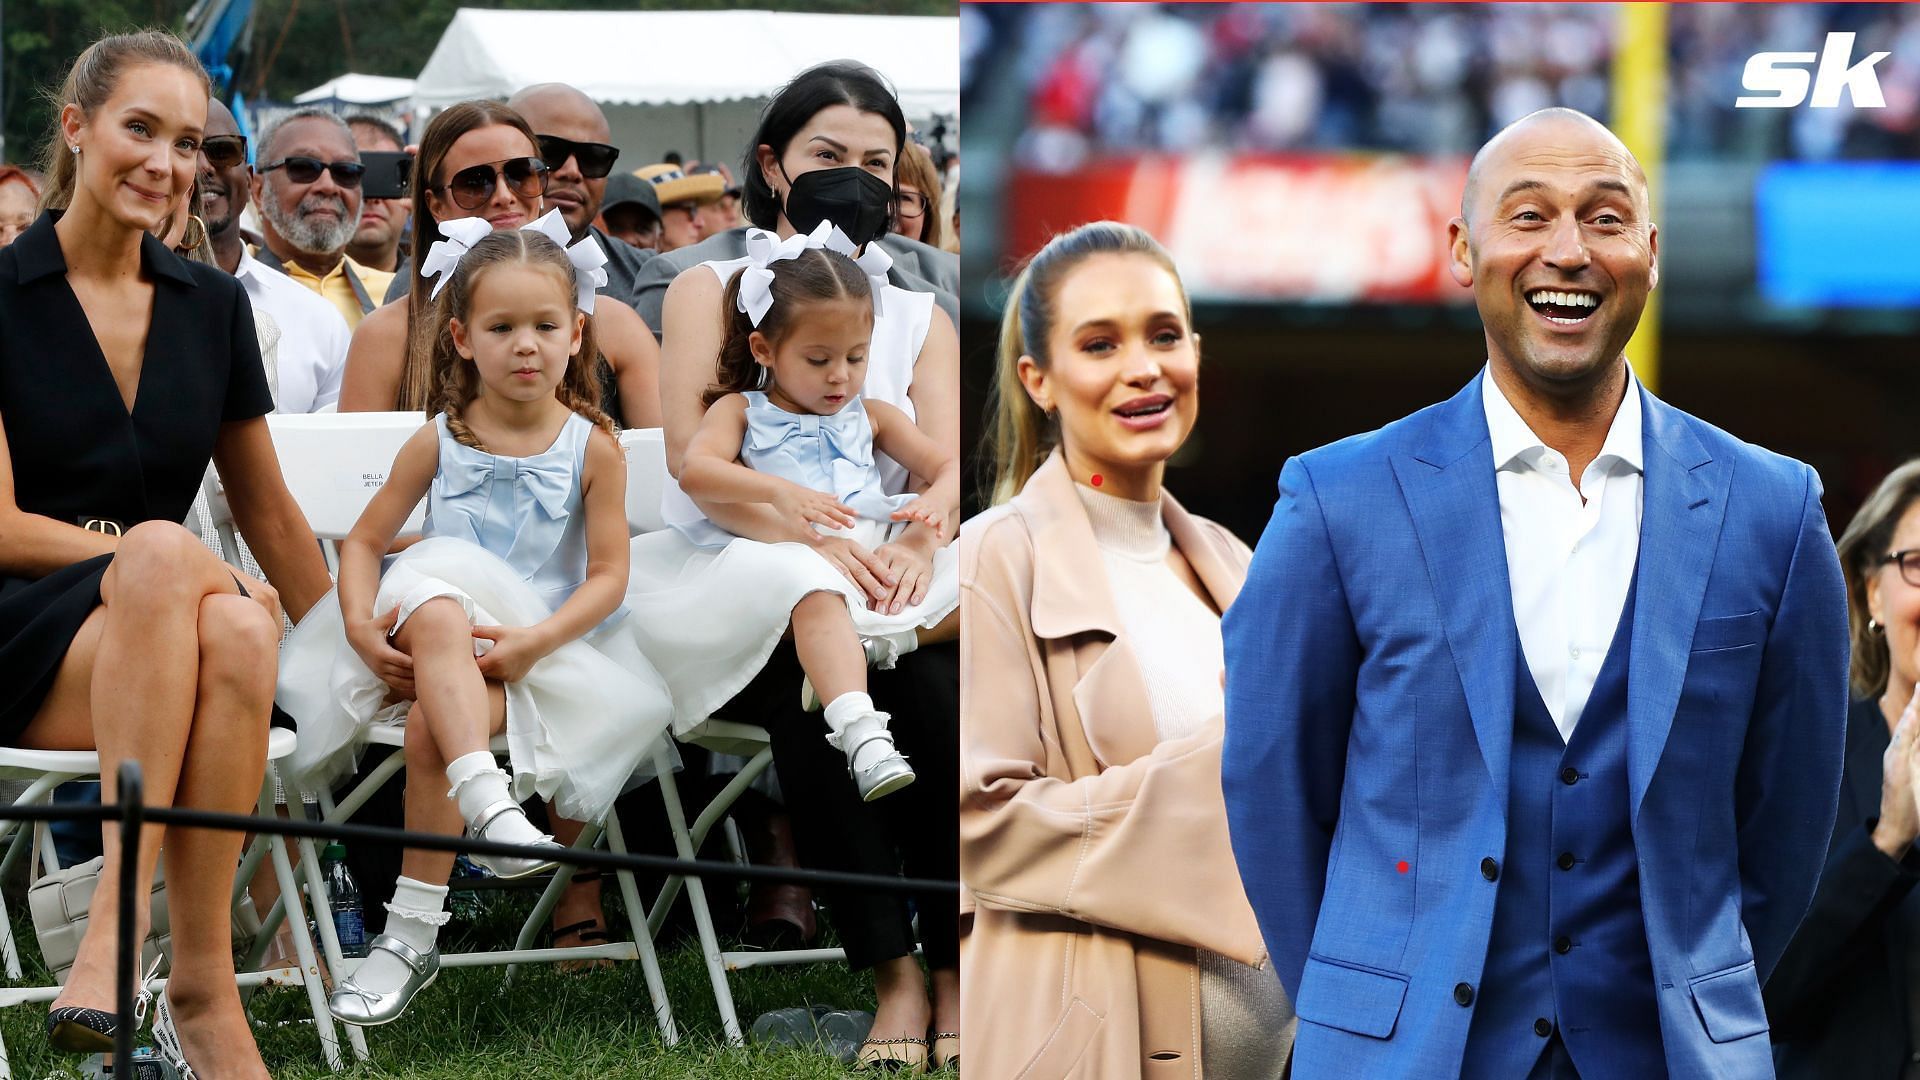 Derek Jeter has shed light on the logistical difficulties of the Christmas season